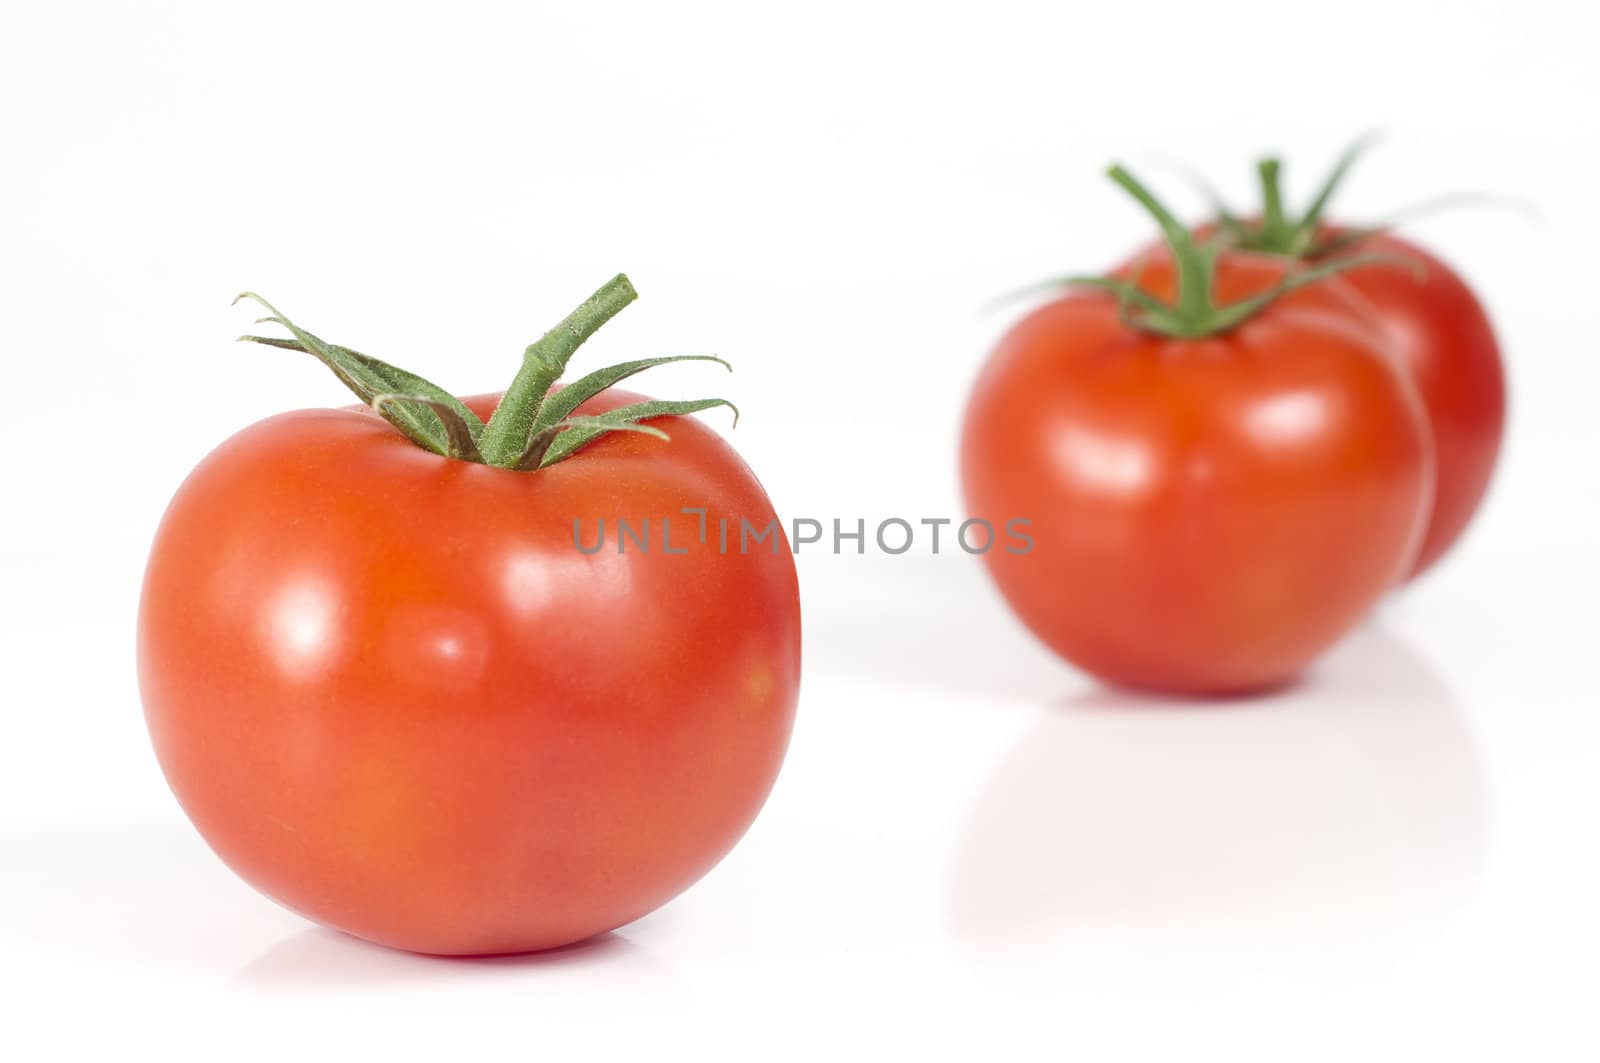 Selective focus on the foreground tomato with two tomatoes in the background isolated on white